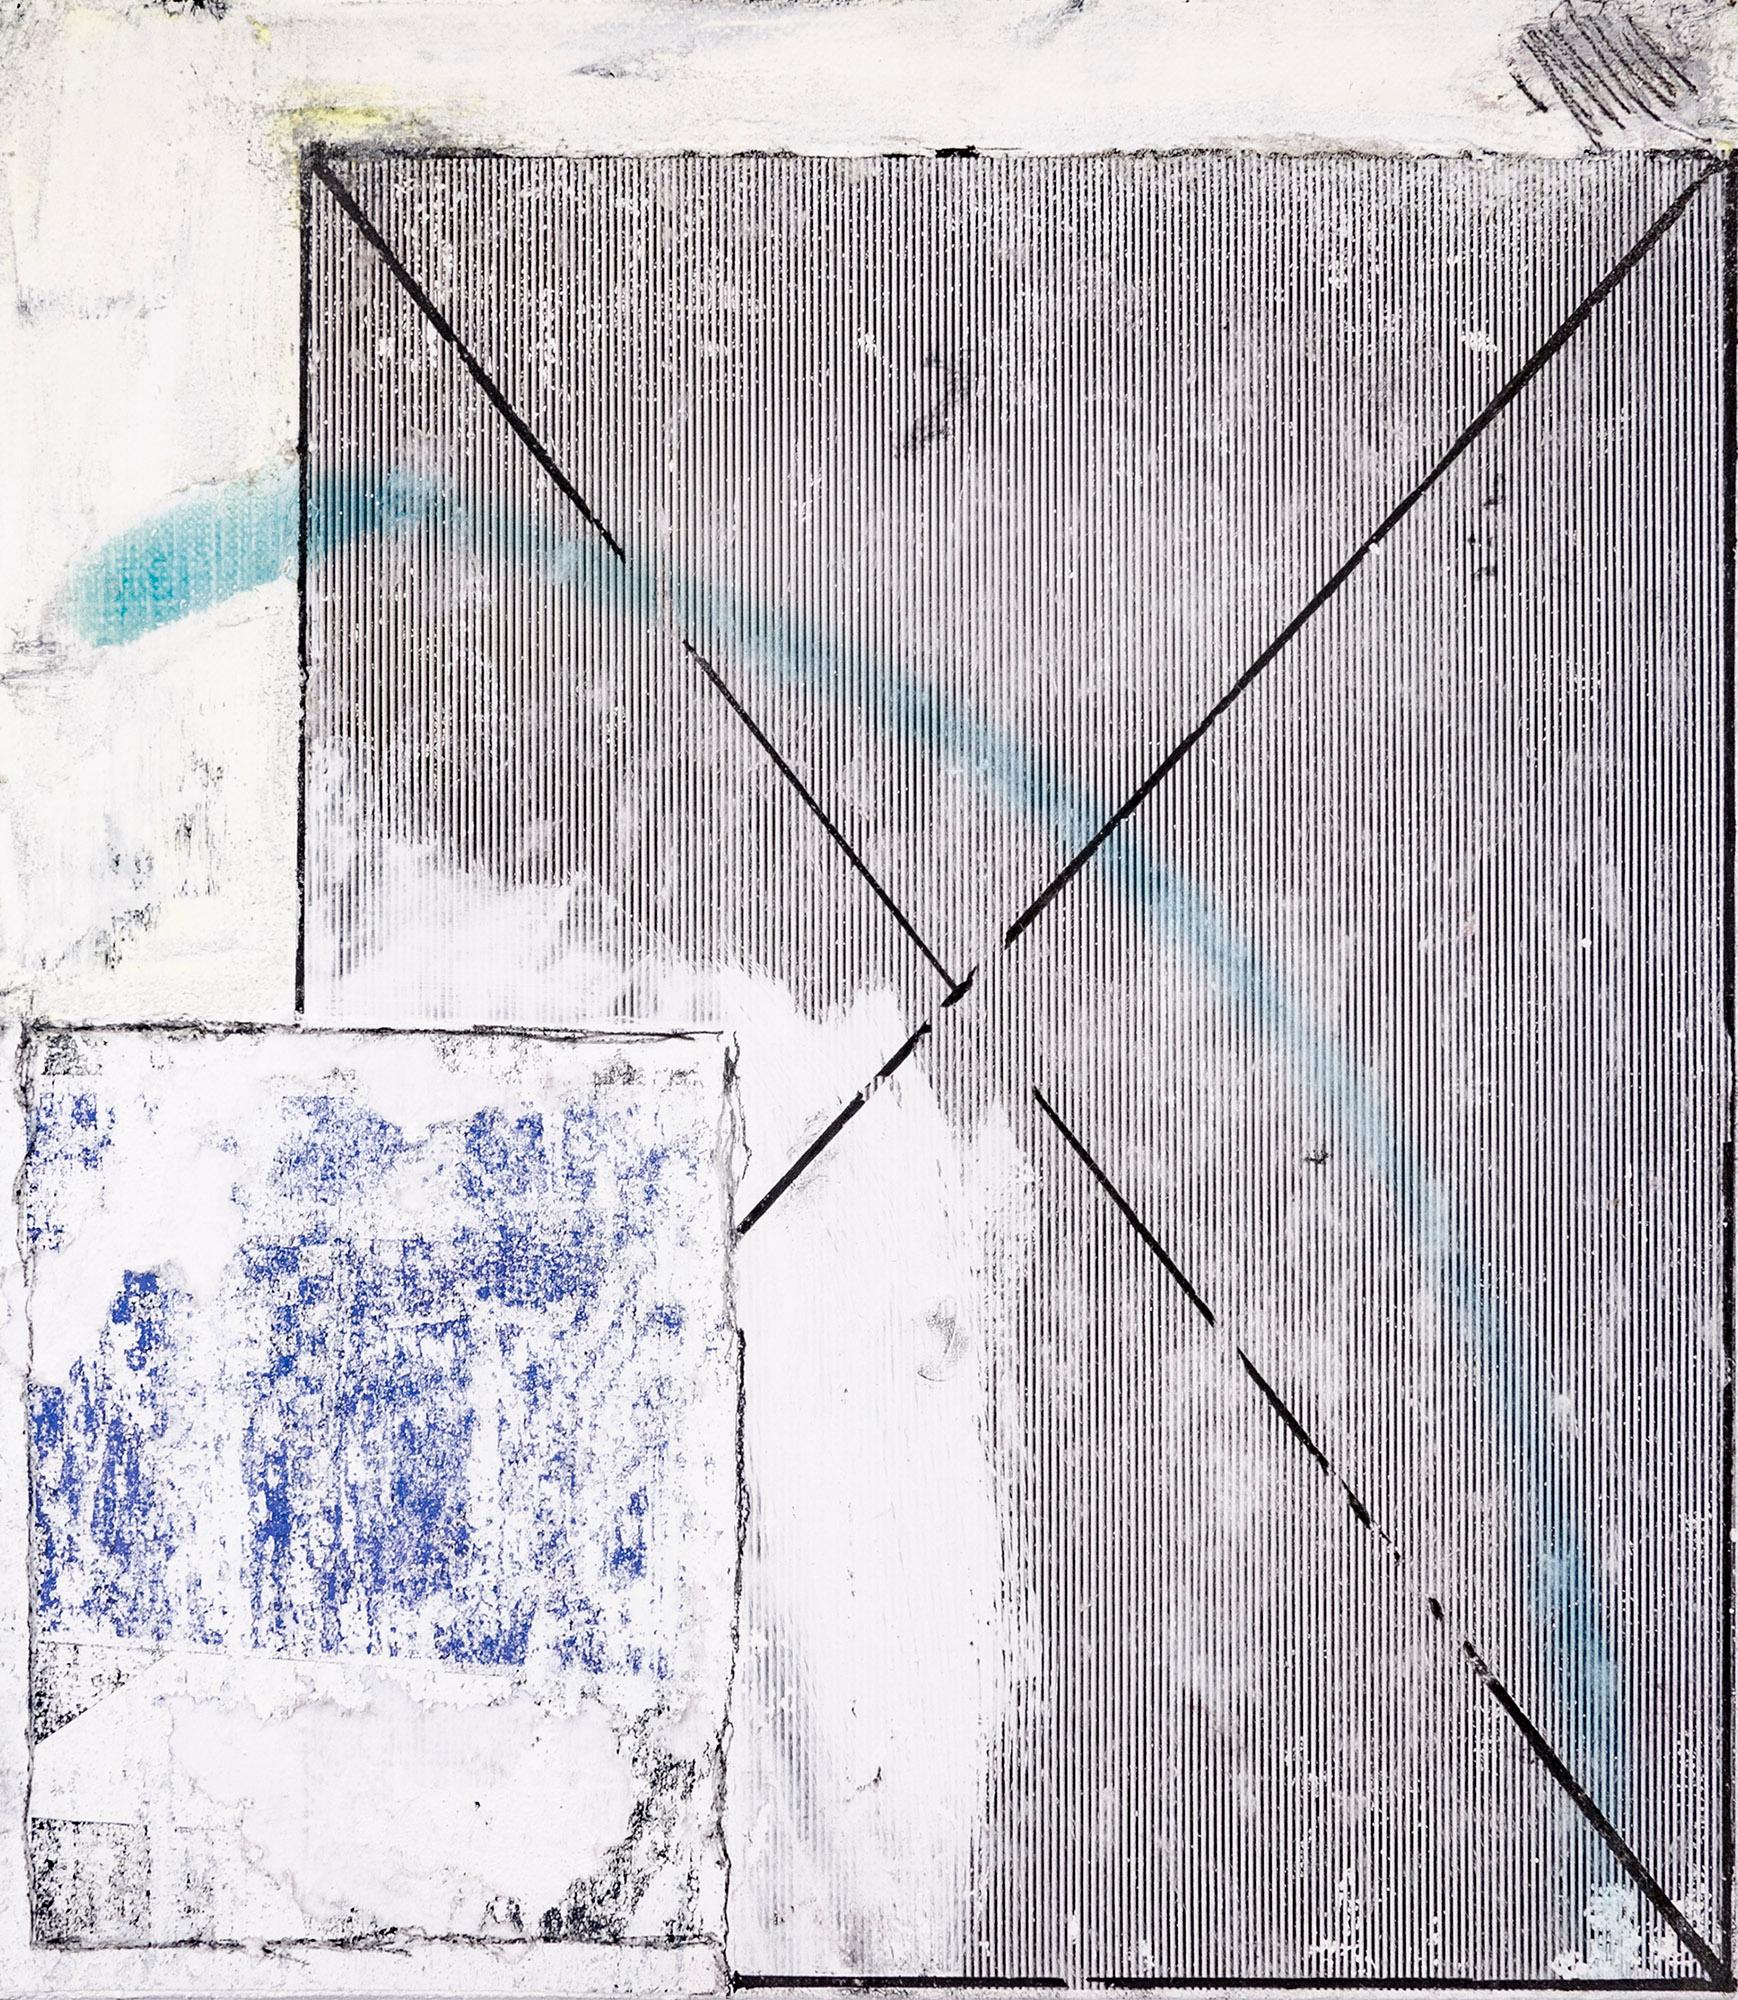 Josh Meillier Abstract Painting - Observation Obfuscation xi